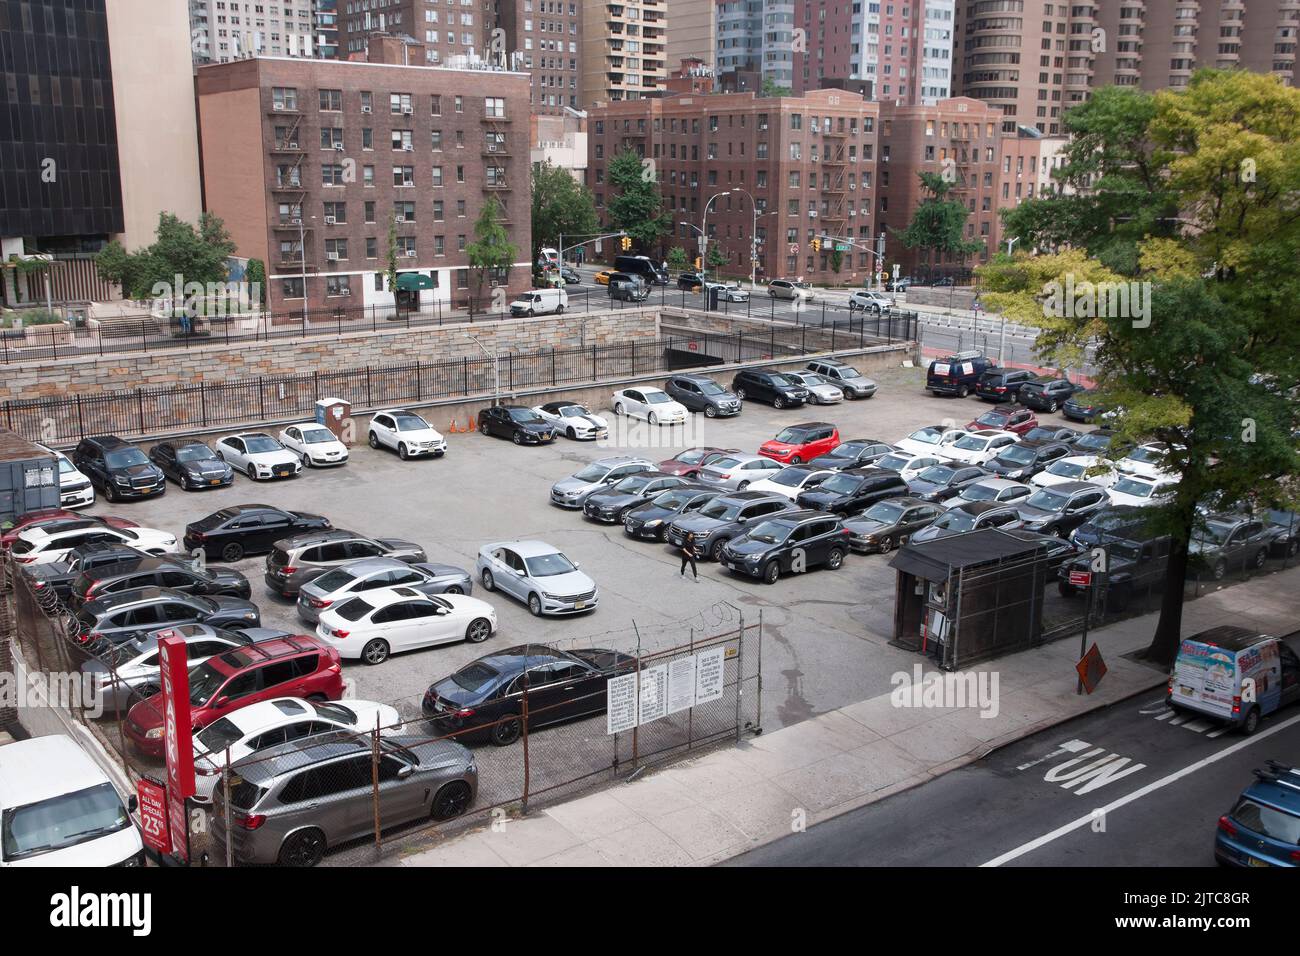 Outdoor car parking lot in midtown, Murray Hill, New York City, USA. Stock Photo